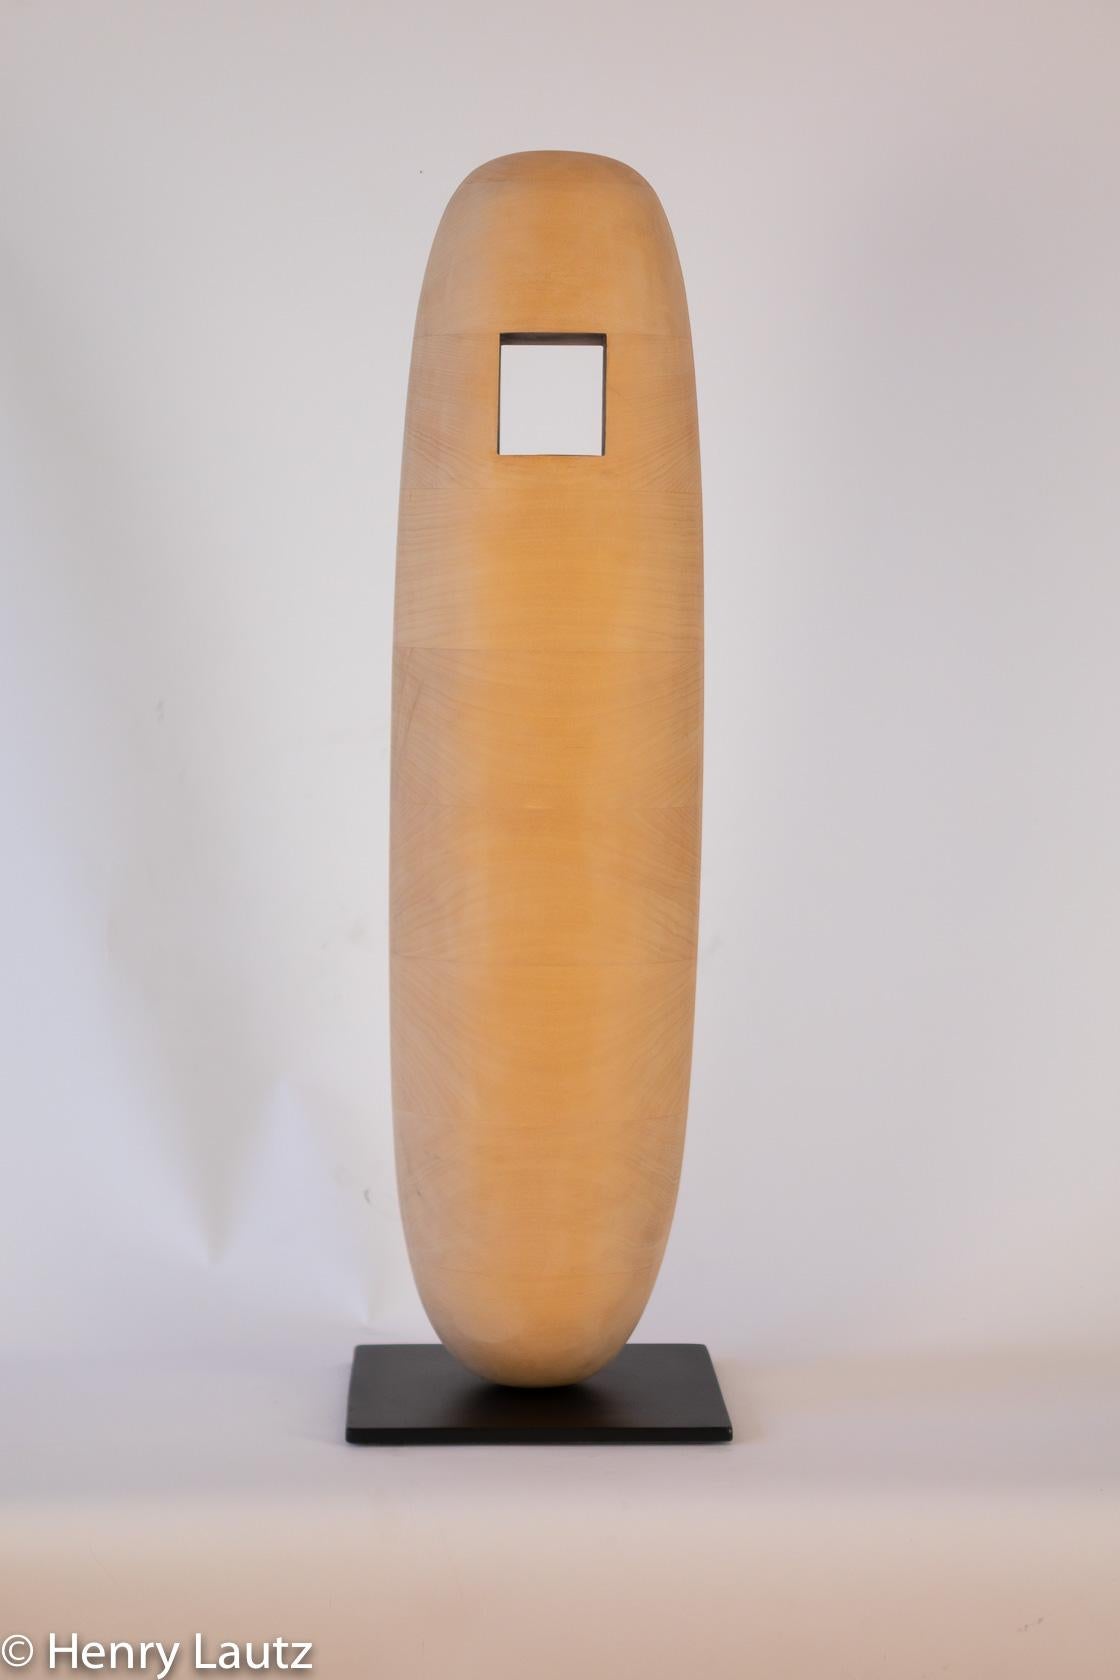 Henry Lautz Abstract Sculpture - Hopewell Elegy No.5 Height is 29"